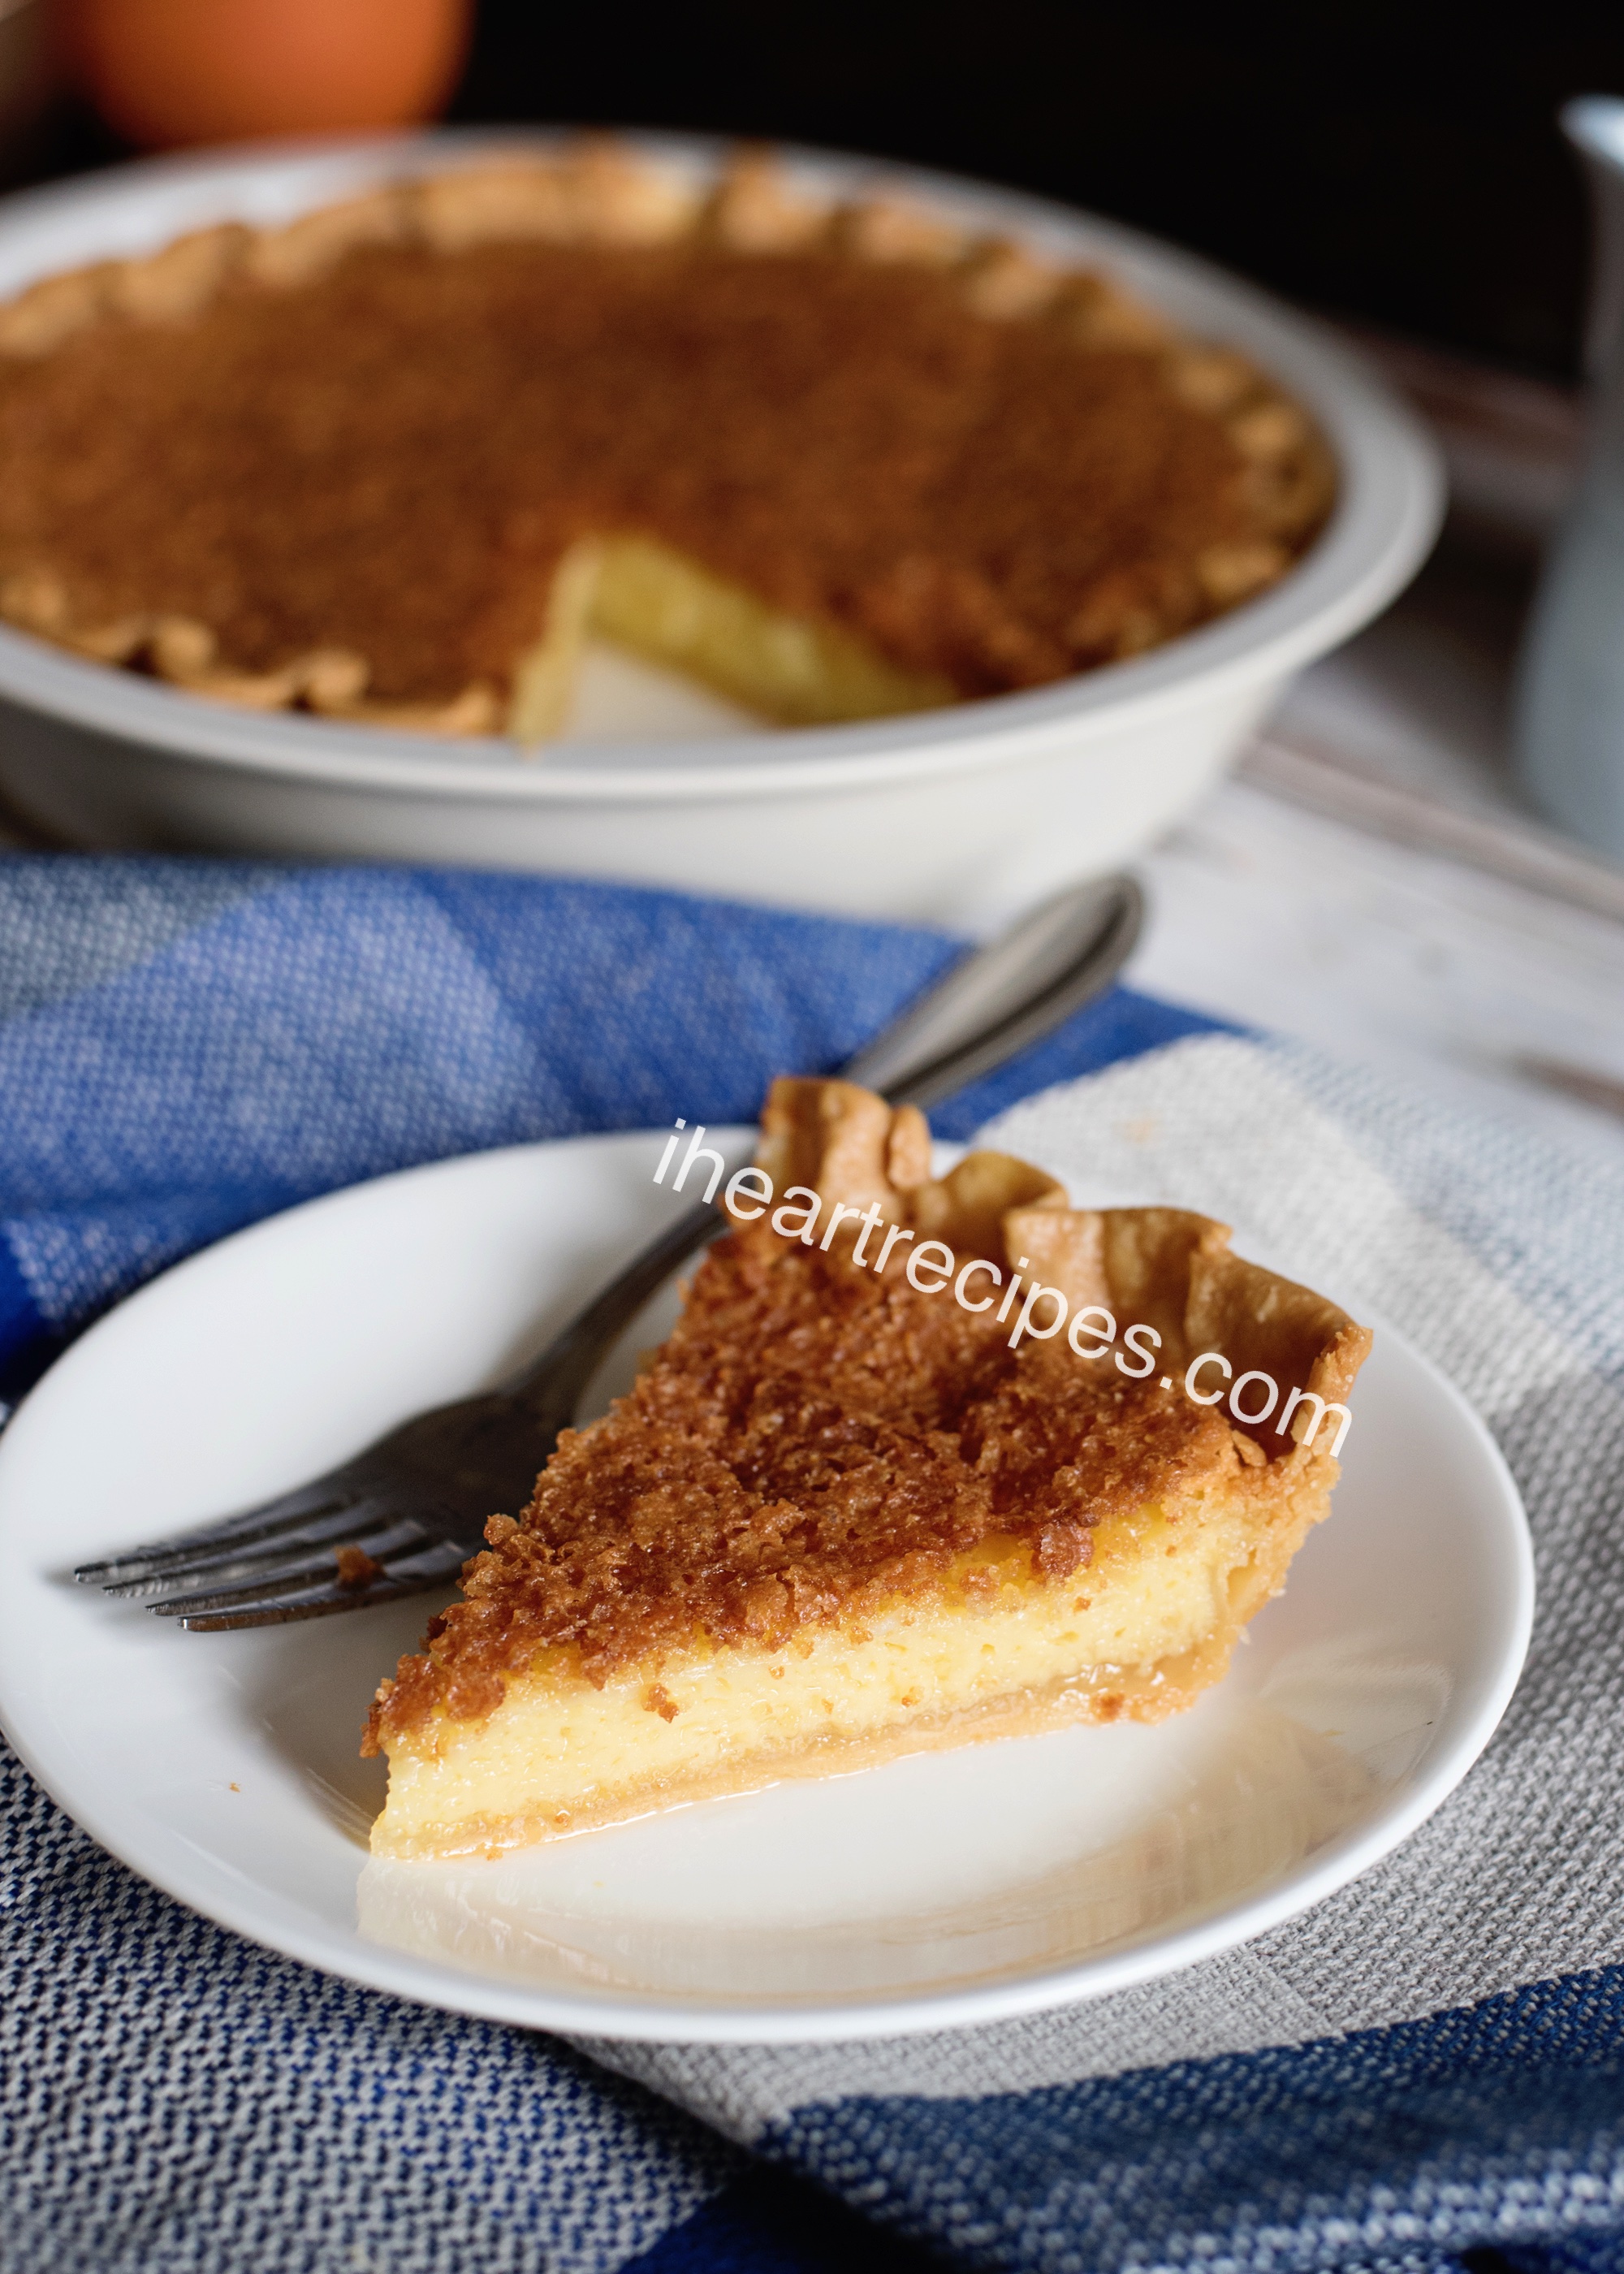 A single slice of homemade old-fashioned chess pie served on a white plate.